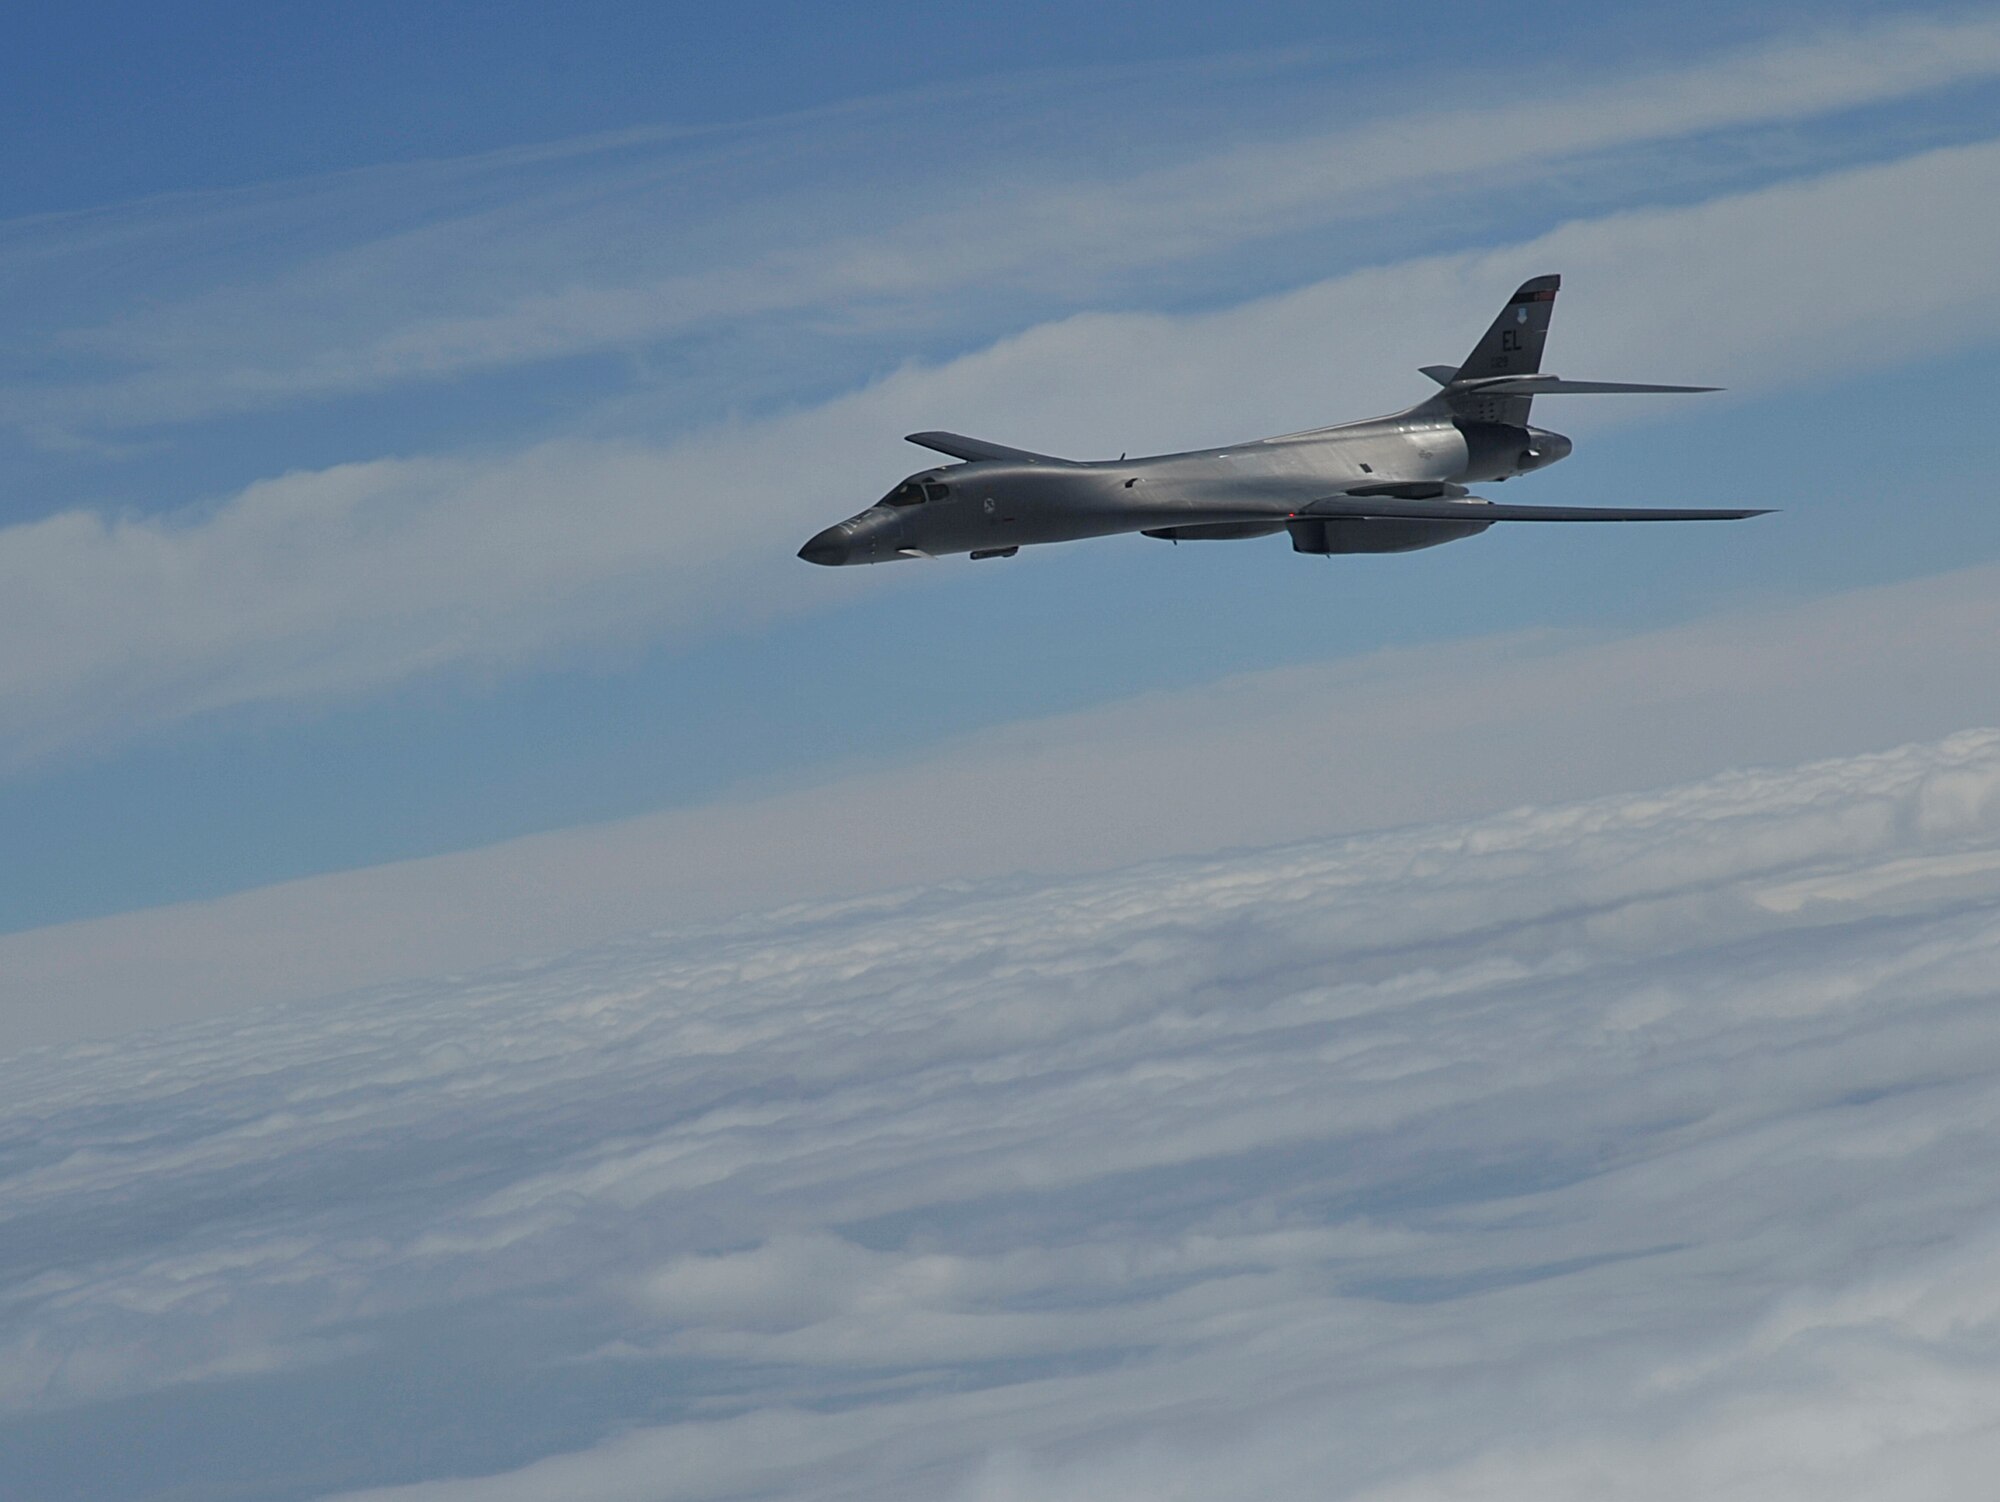 A B-1B Lancer, assigned to Ellsworth Air Force Base, South Dakota, glides through the air over South Dakota, Sept. 23, 2014. Two B-1Bs participated in an aerial refueling training mission with a KC-135 Stratotanker assigned to Fairchild Air Force Base, Washington. The maximum fuel transfer load of the KC-135 is 200,000 pounds. (U.S. Air Force photo by Senior Airman Mary O'Dell/Released)